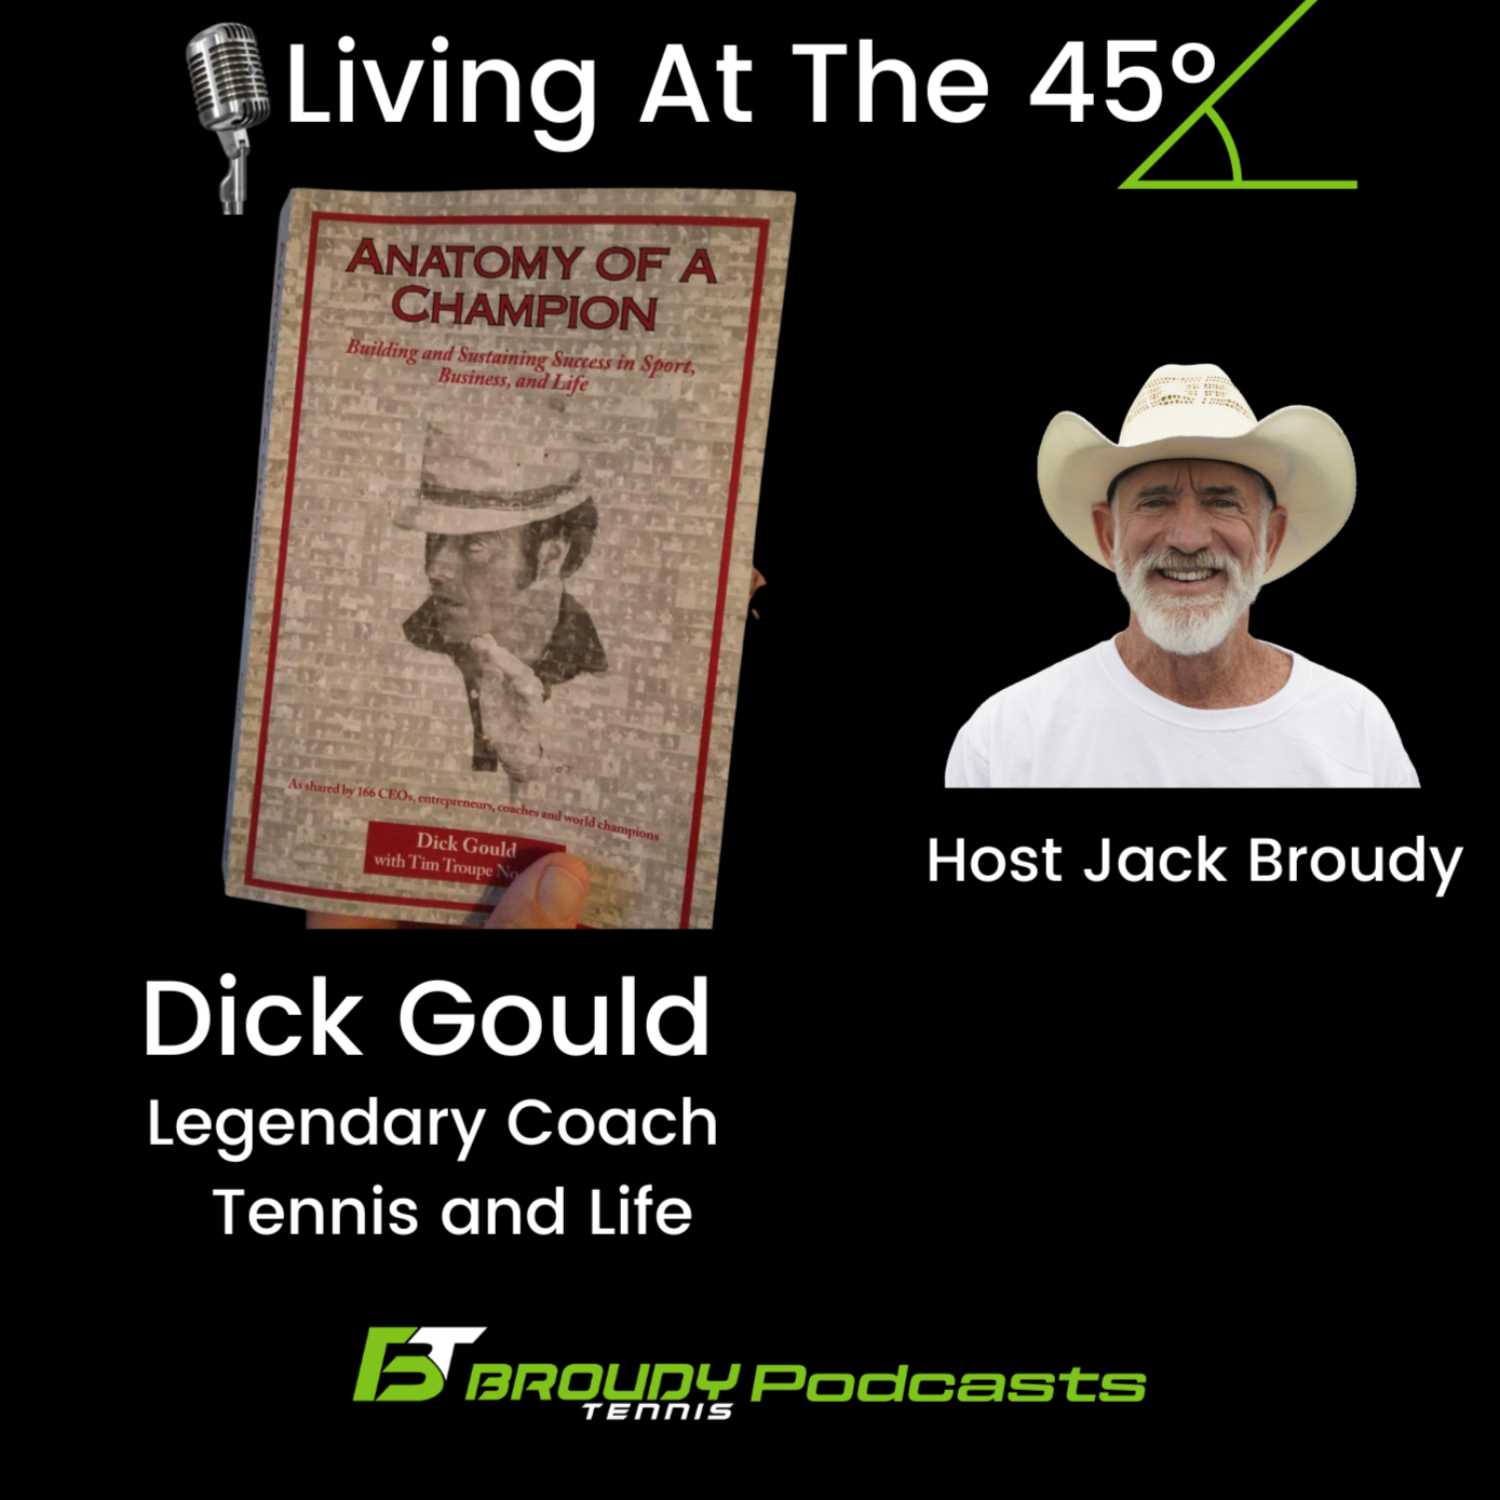 Living at The 45 with Dick Gould: Anatomy Of A Champion